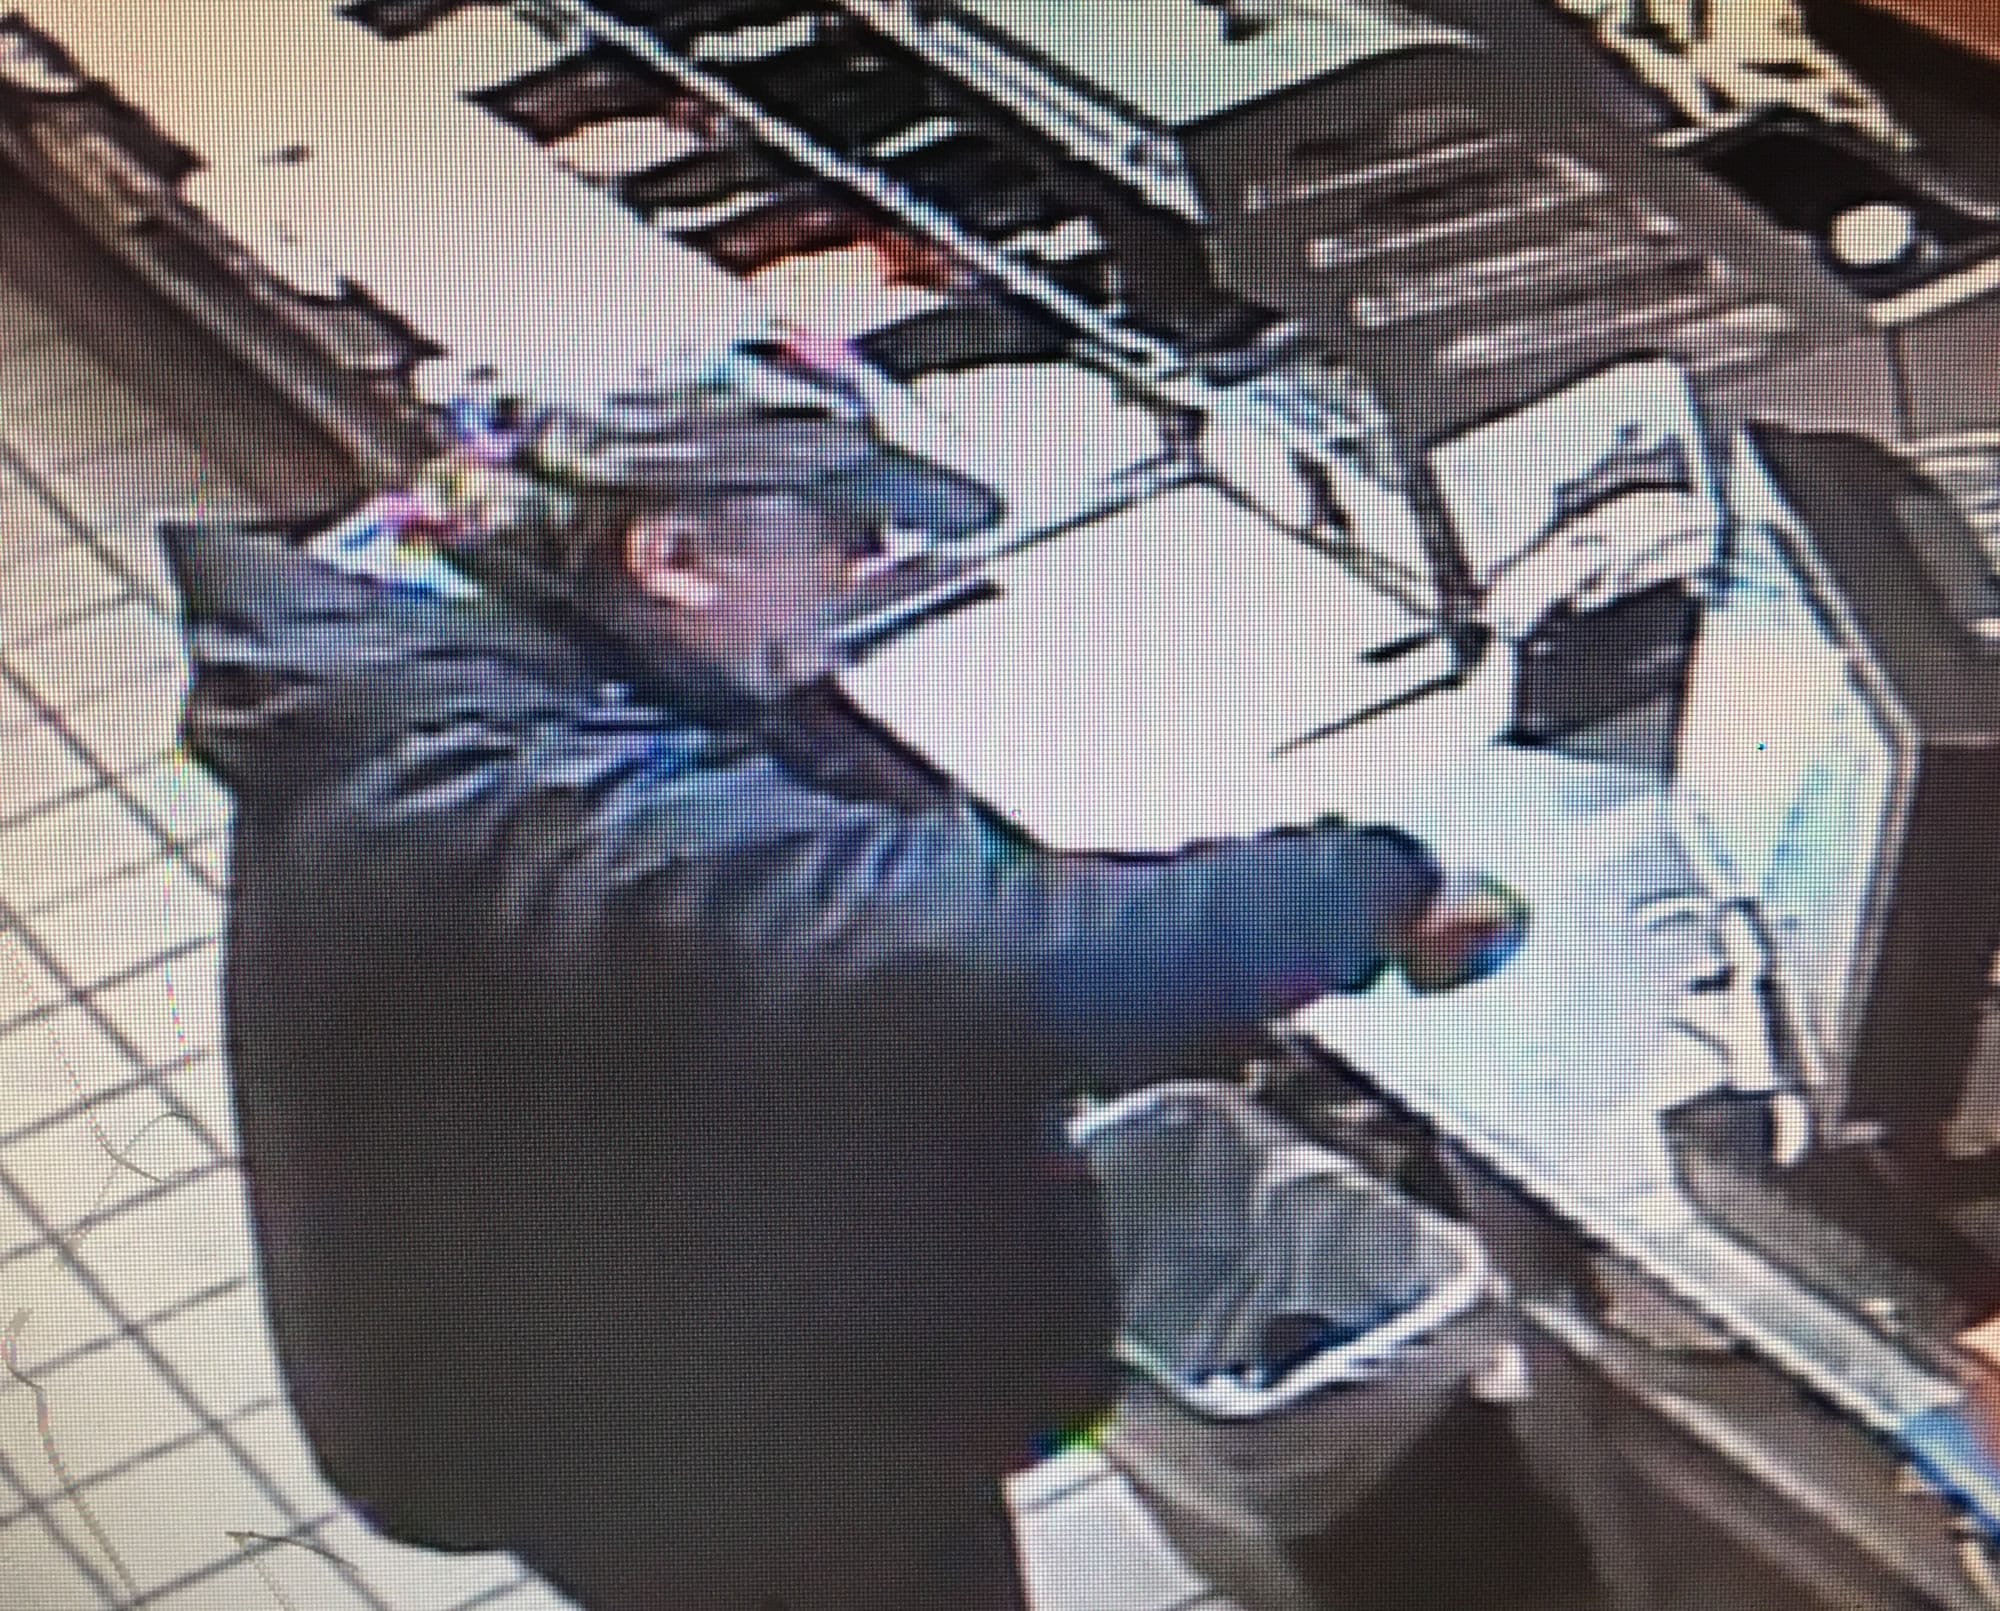 The Clark County Sheriff's Office released this photo of a heavyset man in his 50s who robbed a Subway sandwich shop Tuesday morning in Salmon Creek.